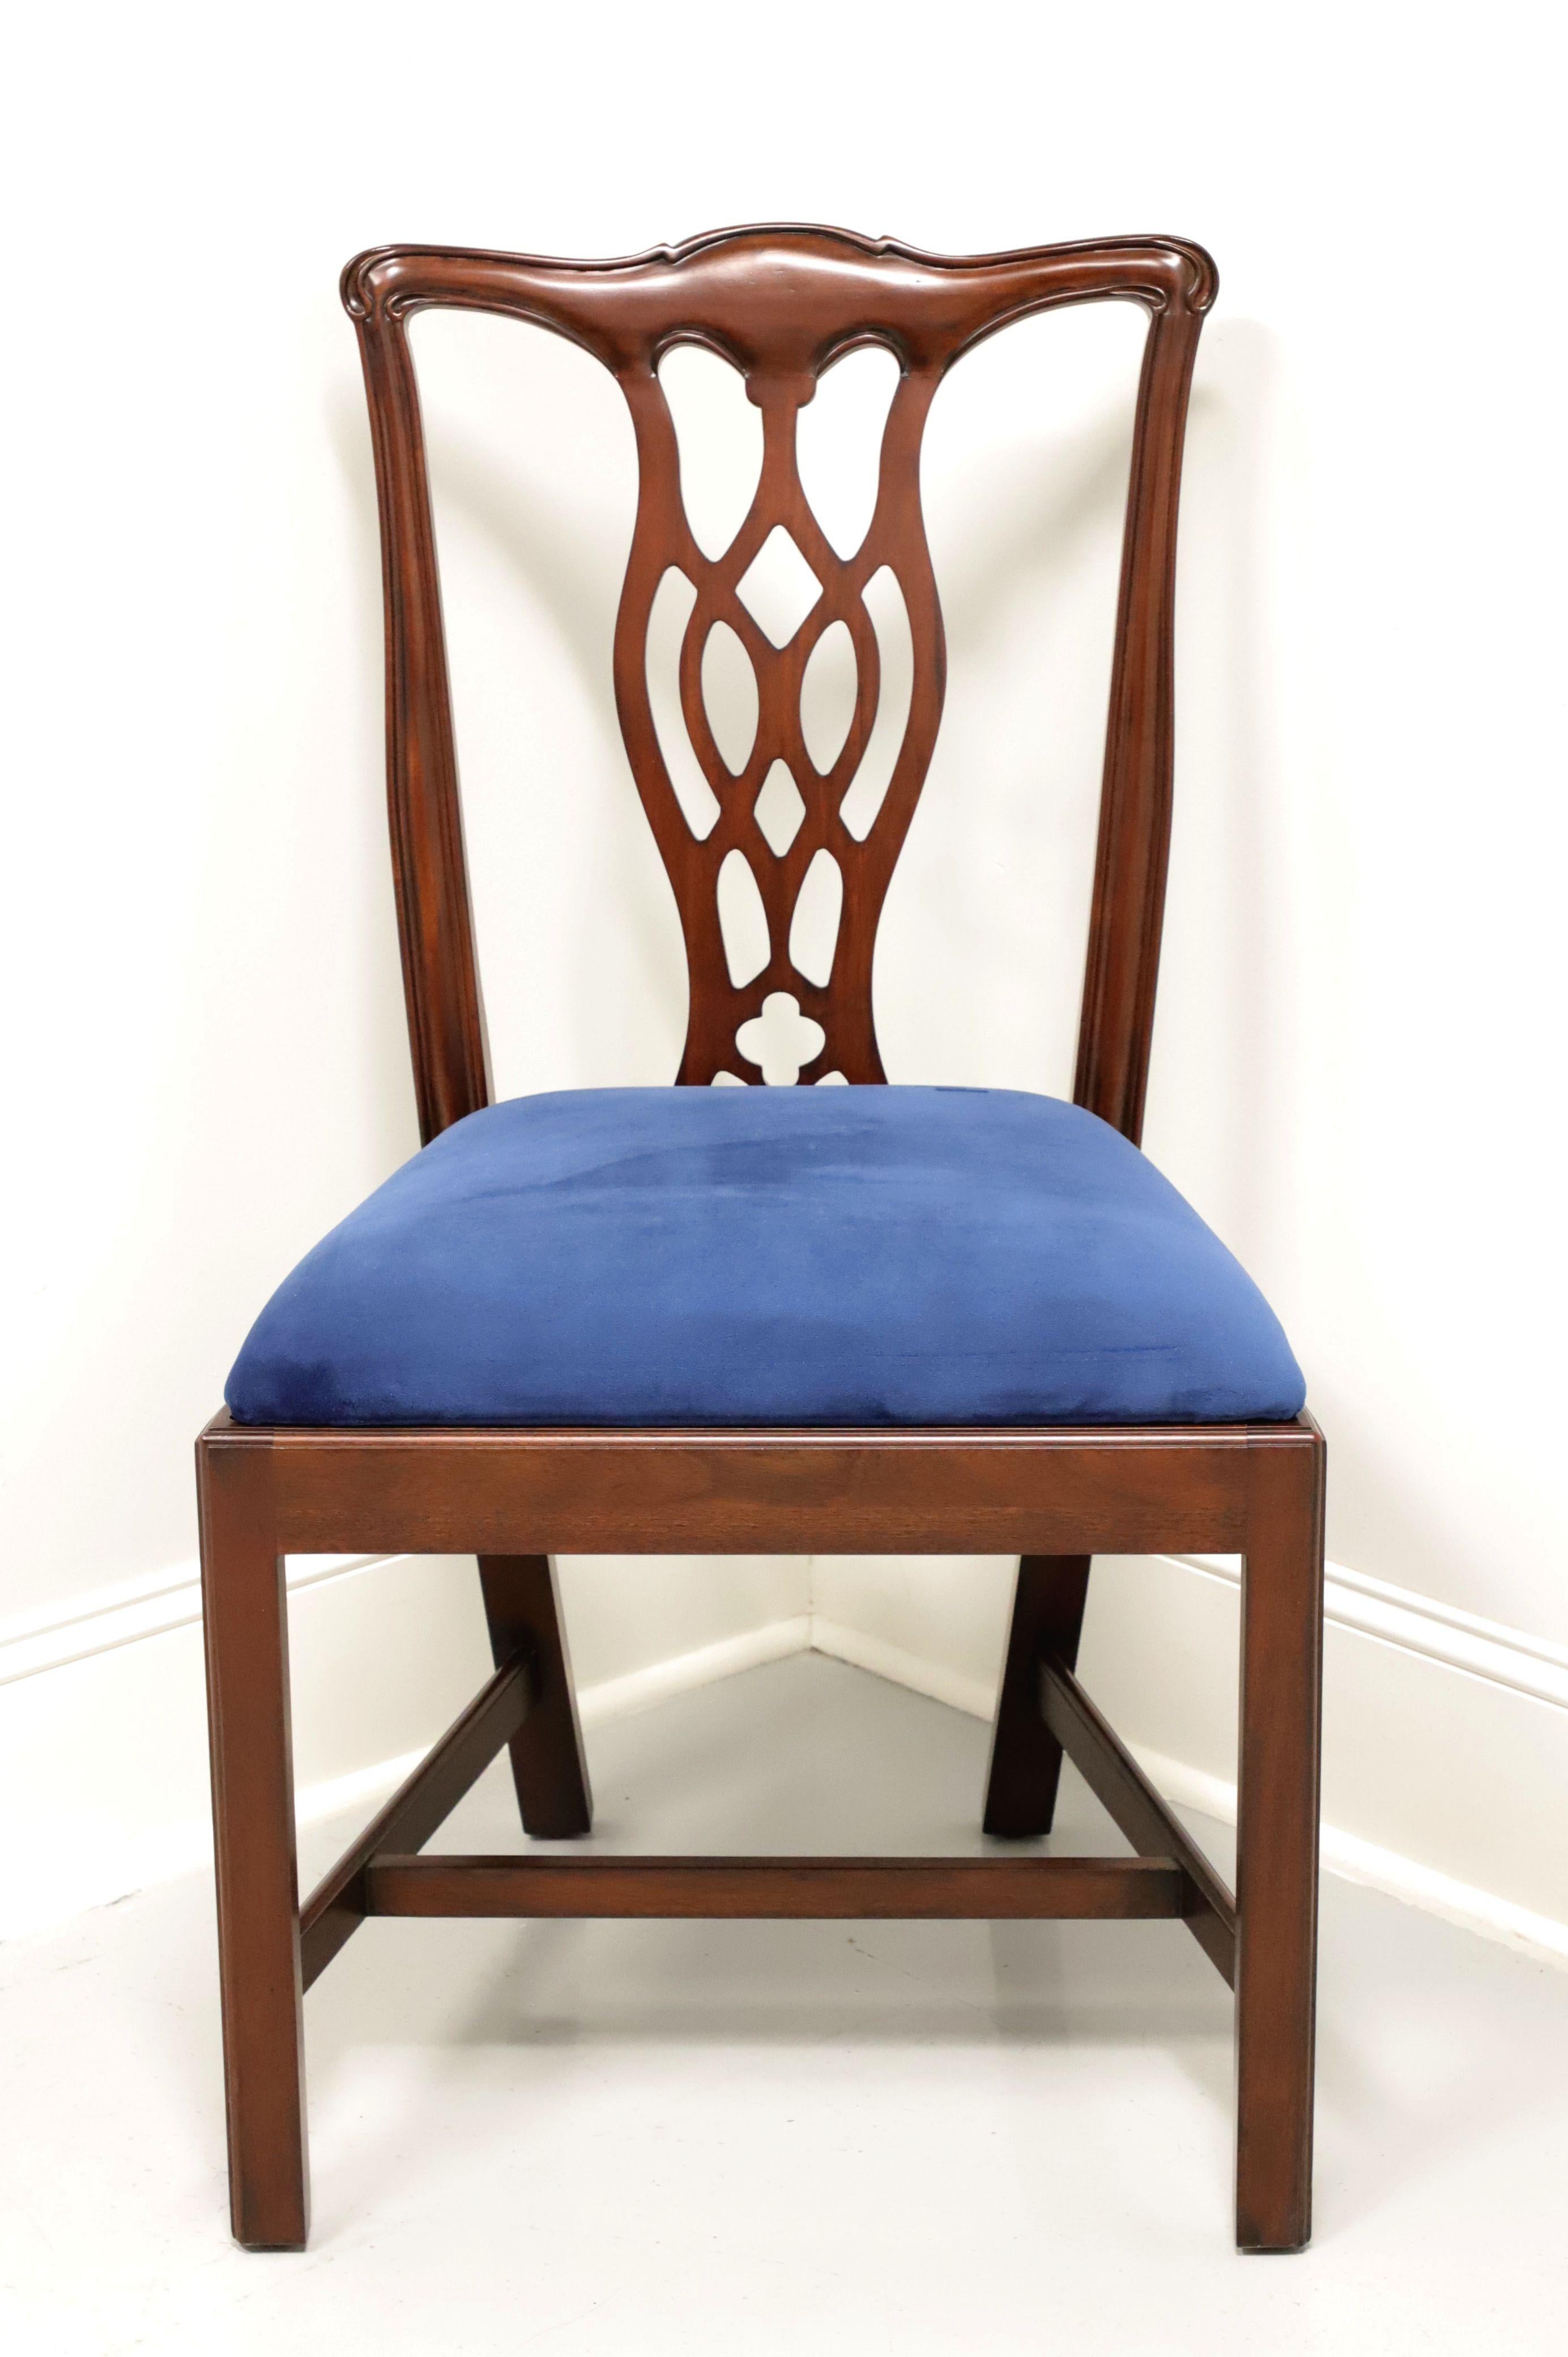 A dining side chair in the Chippendale style by Hickory Chair Company. Solid mahogany with carved crestrail, carved seat back, blue color crushed velvet upholstered seat, straight legs and stretchers. Made in North Carolina, USA, in the late 20th